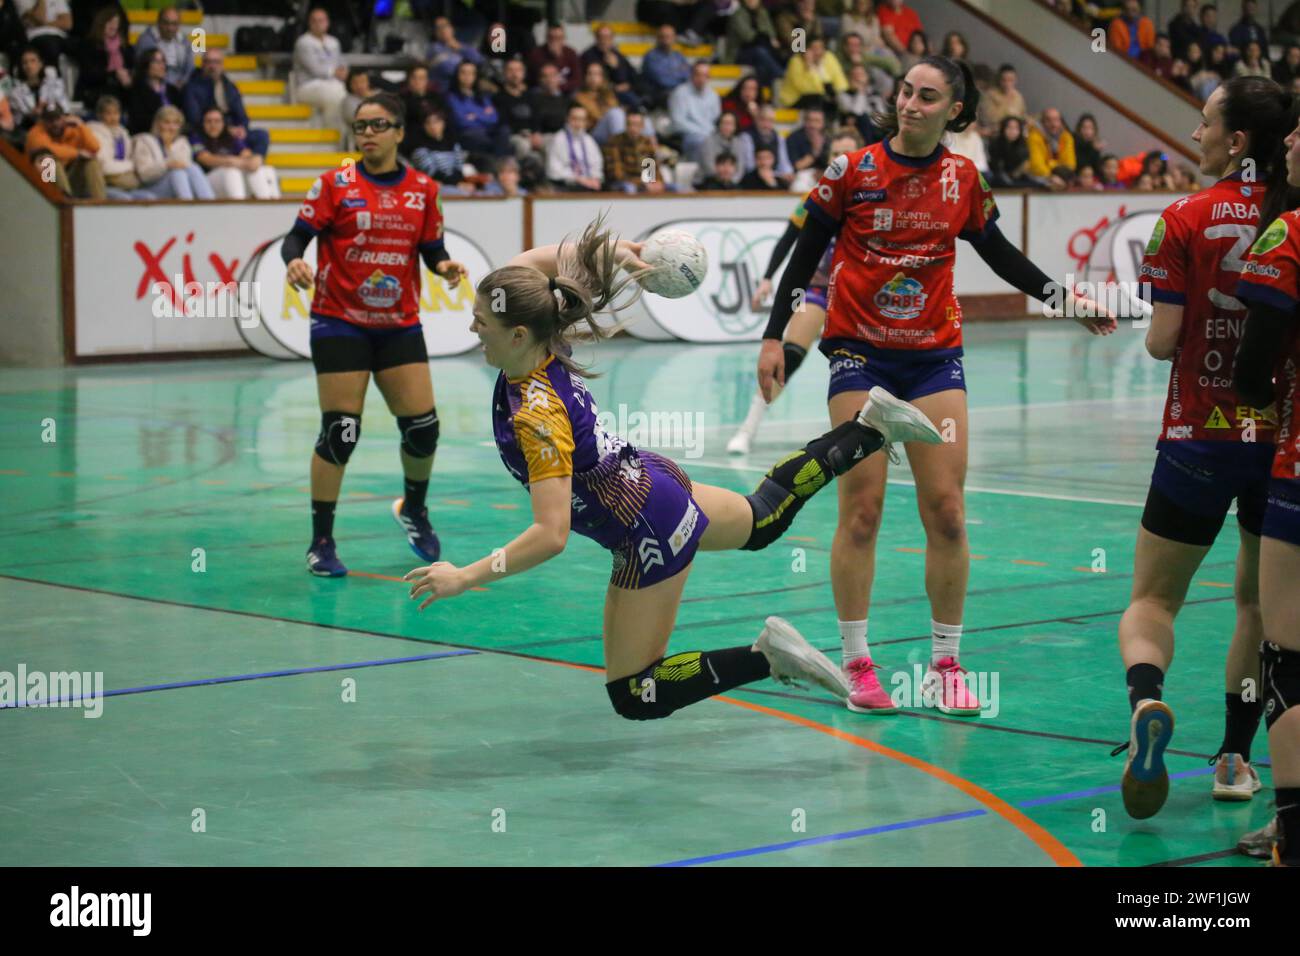 Gijón, Spain. 27th Jan, 2024. The player of Motive.co Gijón Balonmano La Calzada, Dorottya Margit Zentai (66) shoots on goal during the 15th matchday of the Liga Guerreras Iberdrola 2023-24 between Motive.co Gijón Balonmano La Calzada and Conserbas Orbe Rubensa BM. Porriño, on January 27, 2024, at the Arena Pavilion, in Gijón, Spain. (Photo by Alberto Brevers/Pacific Press) Credit: Pacific Press Media Production Corp./Alamy Live News Stock Photo